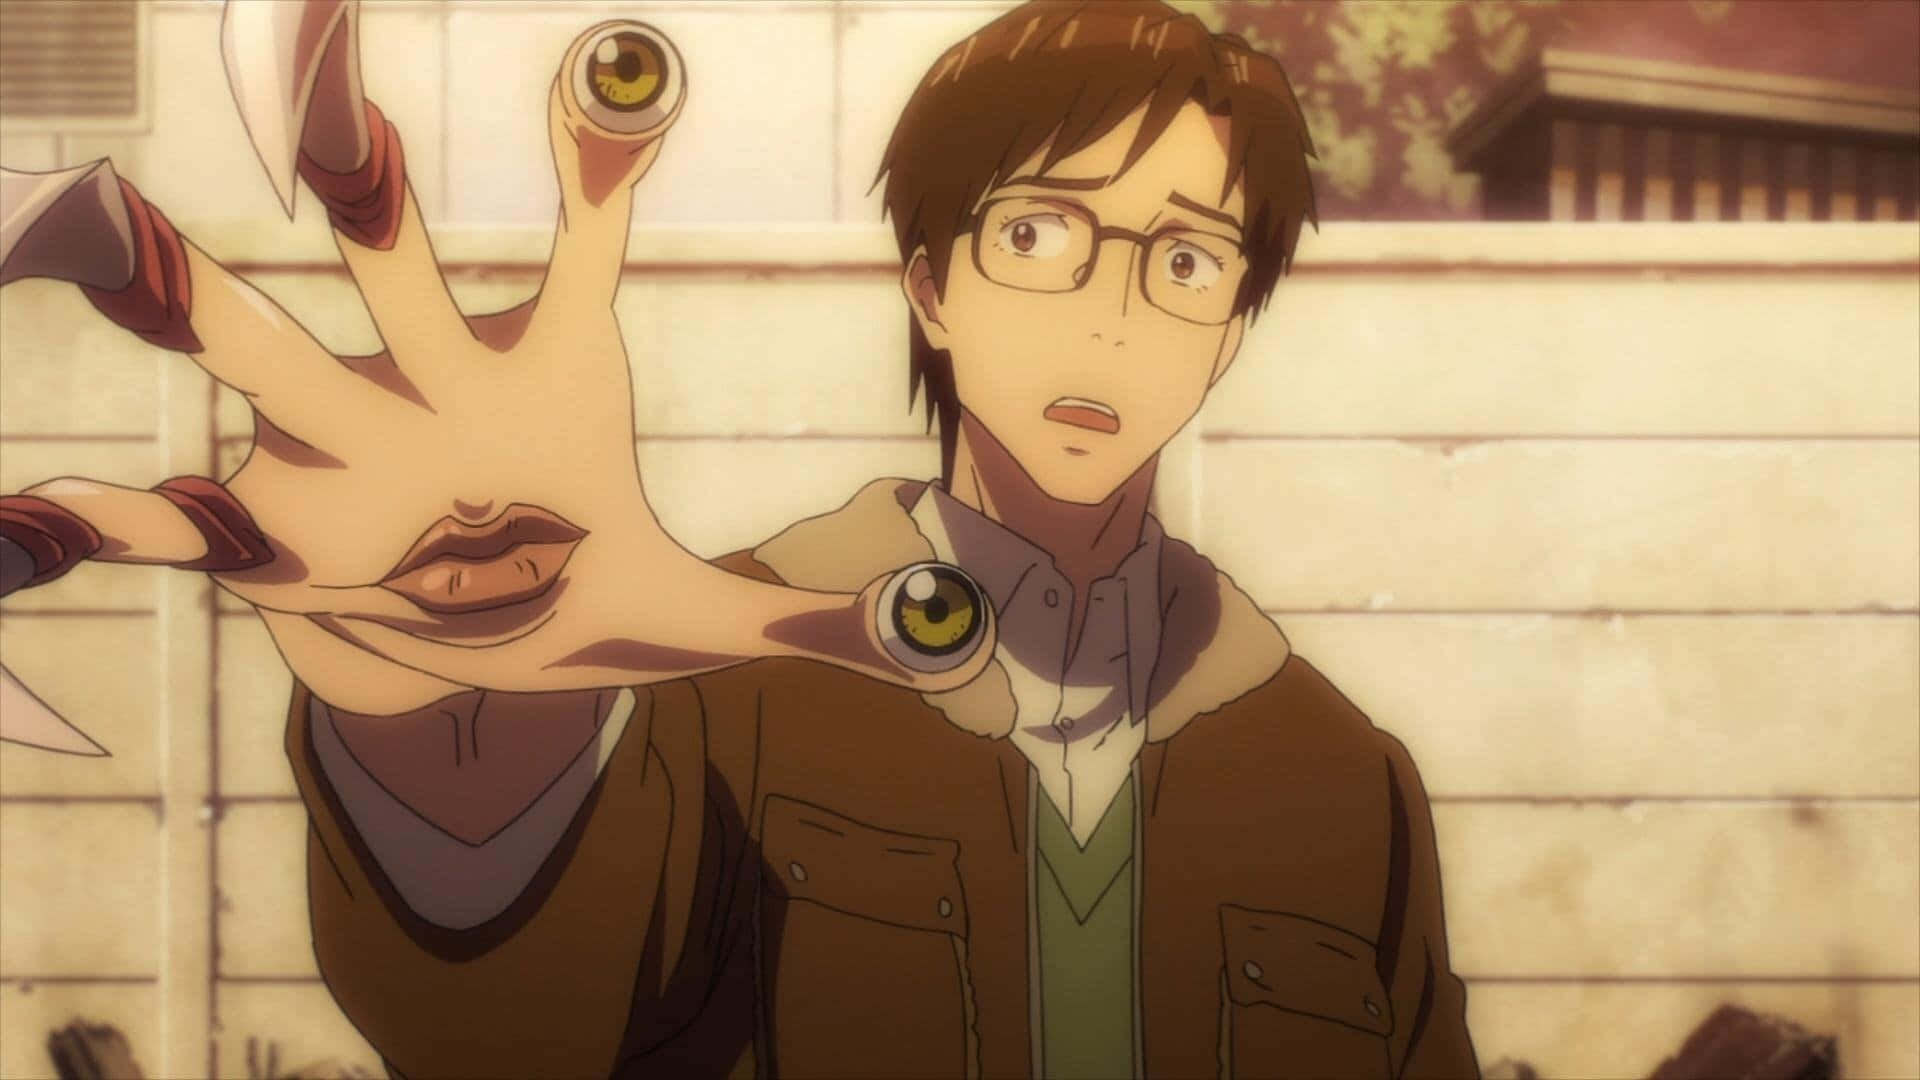 The alien parasites of Parasyte prepare to attack humanity